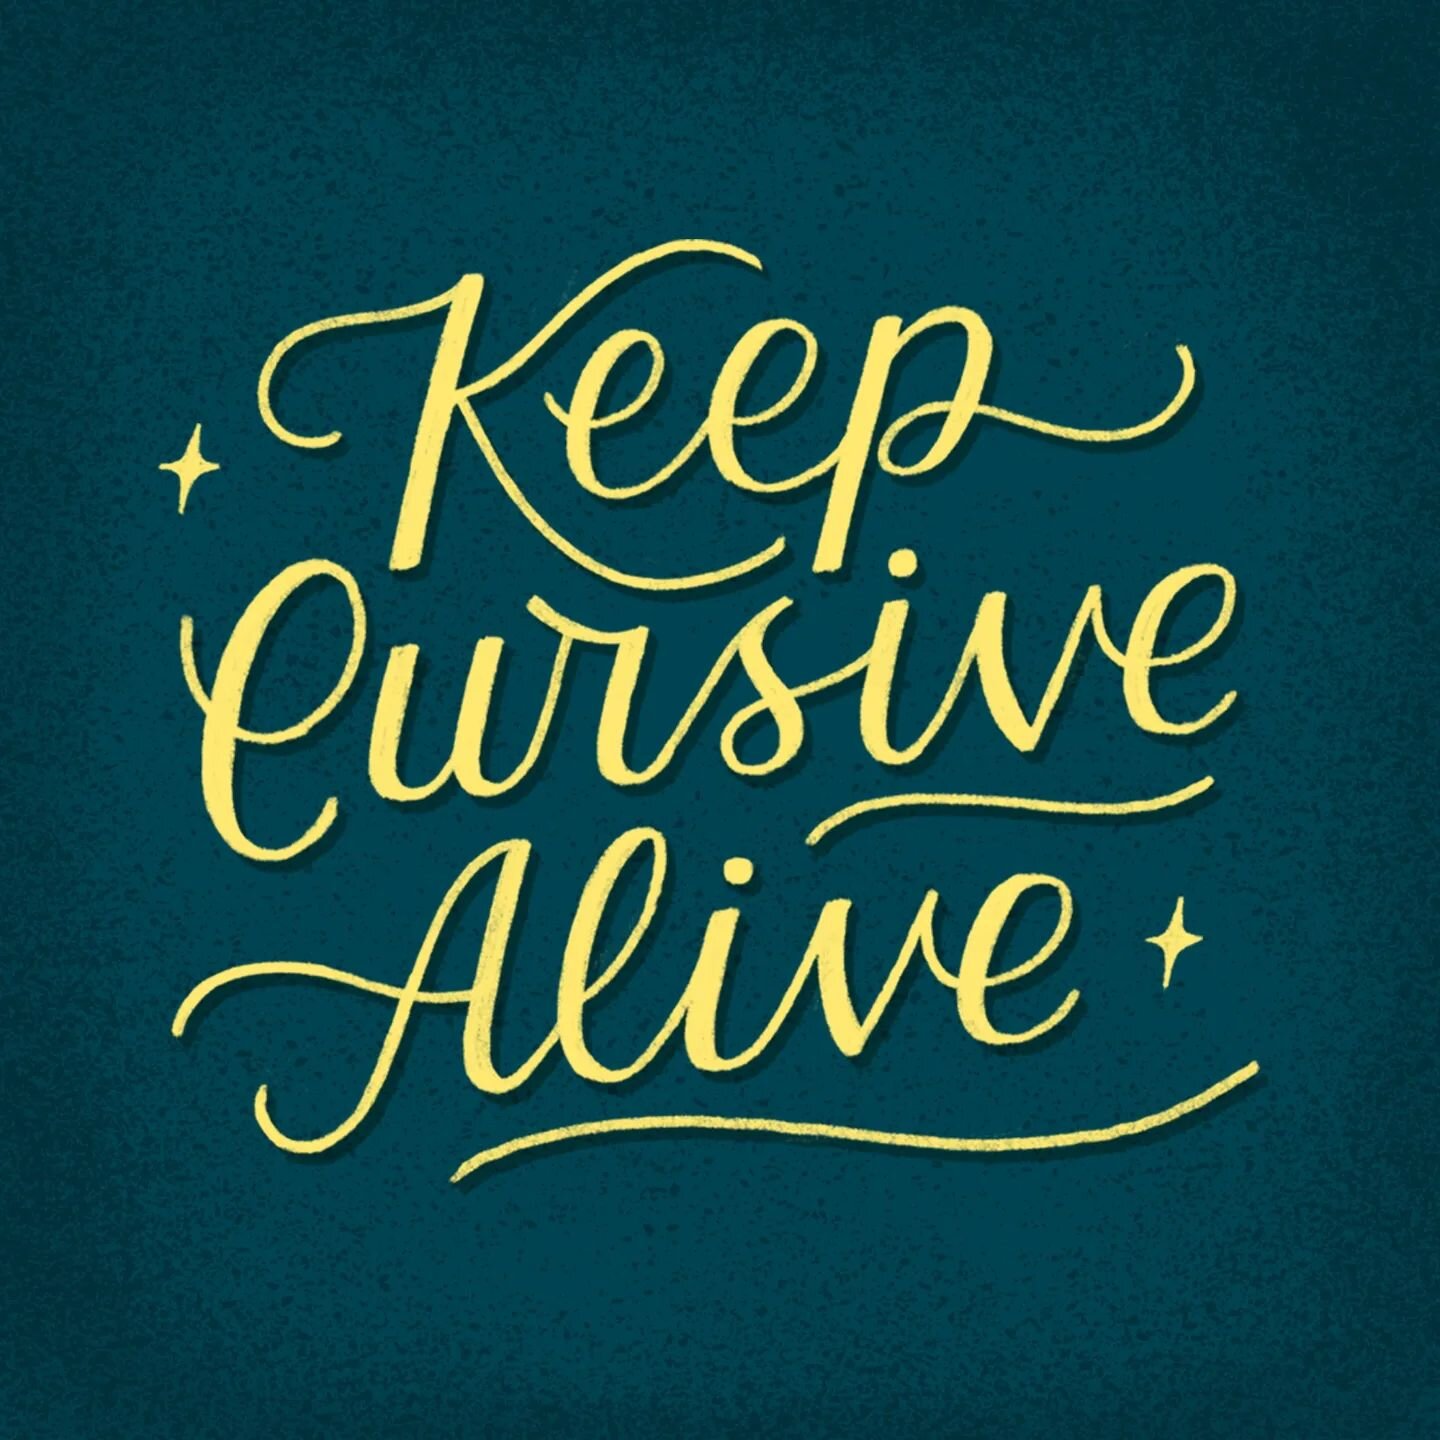 ✨ KEEP CURSIVE ALIVE ✨

Adult script lettering workshop on Wednesday April 24th, 7:00 - 8:30 pm at @knot_work_studio 

Sign up at the link in bio! If you can't make it and think it's cool, please consider sharing 💙